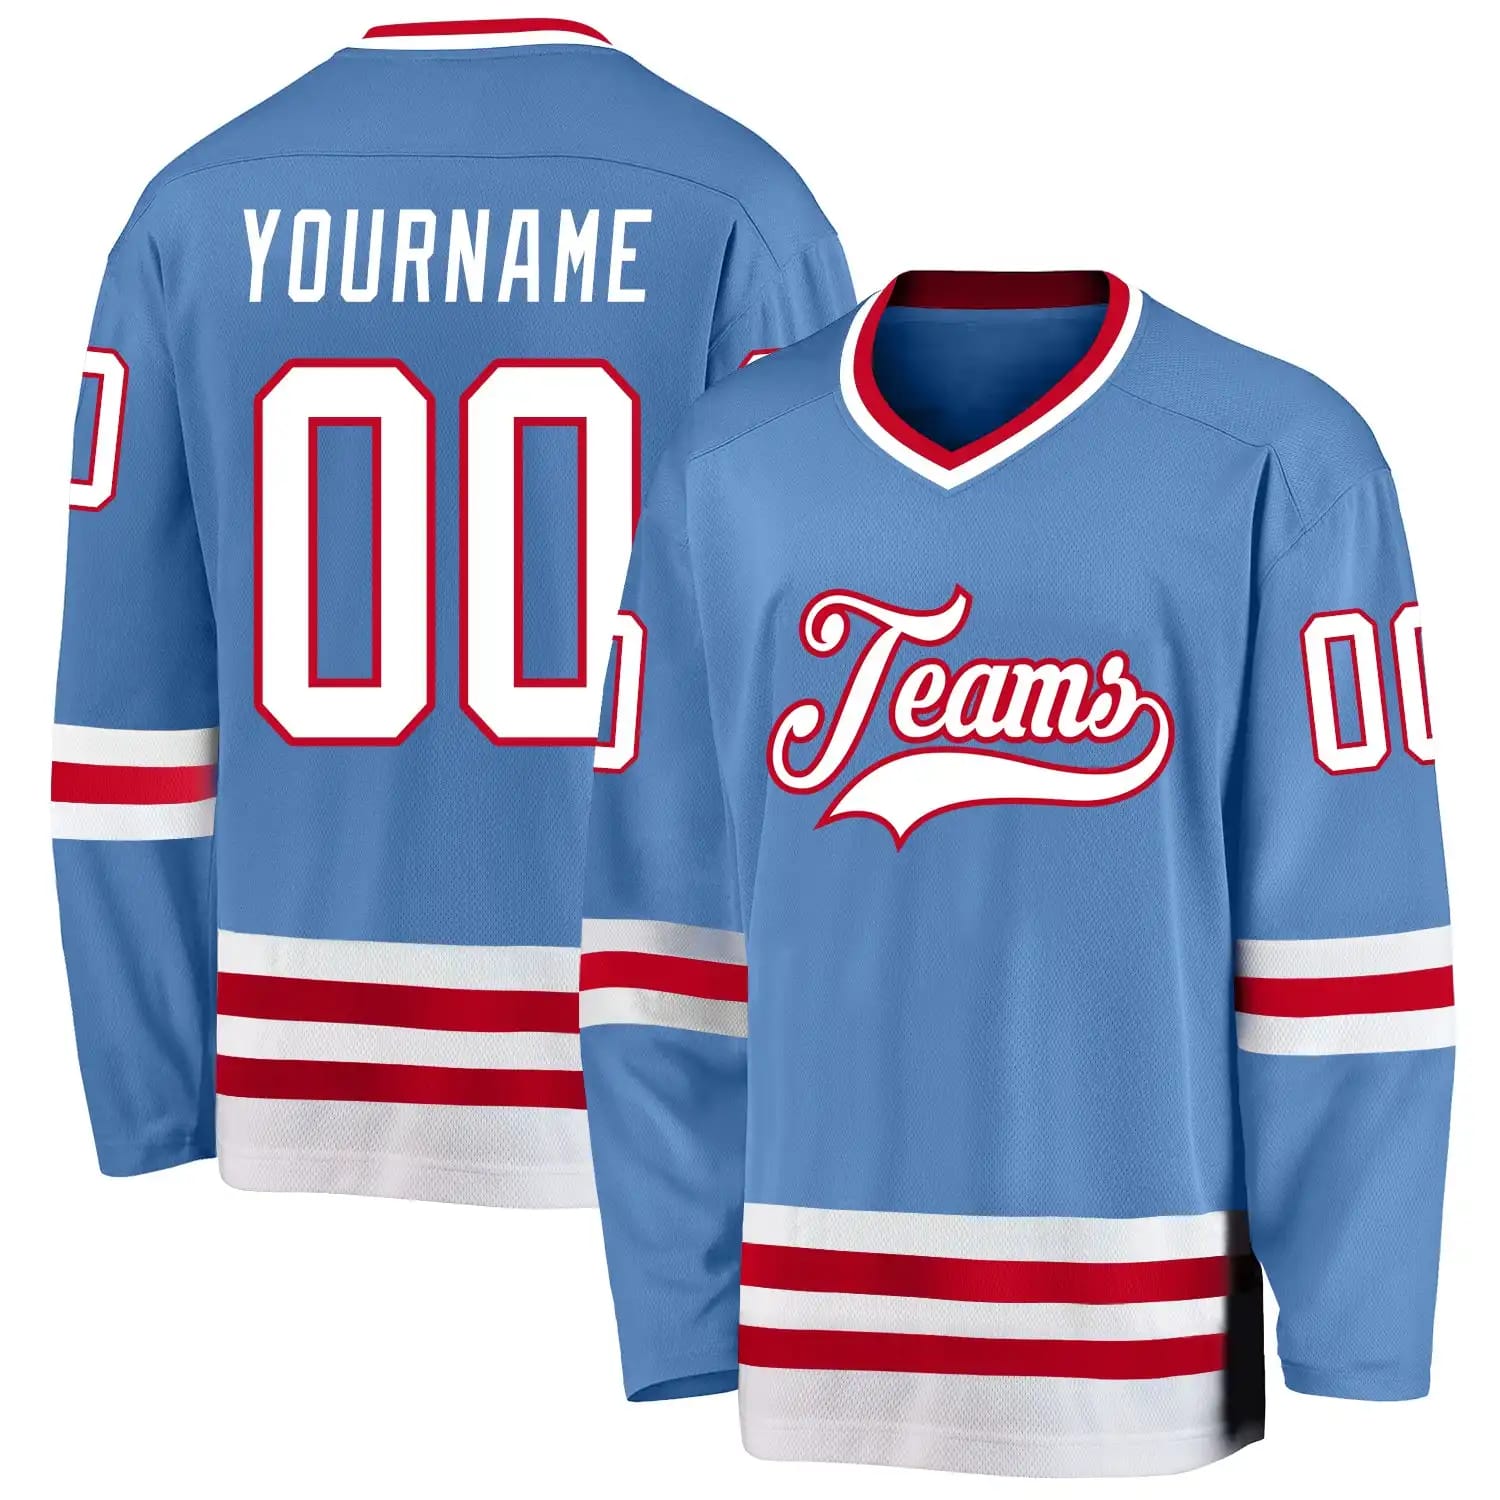 Stitched And Print Light Blue White-red Hockey Jersey Custom